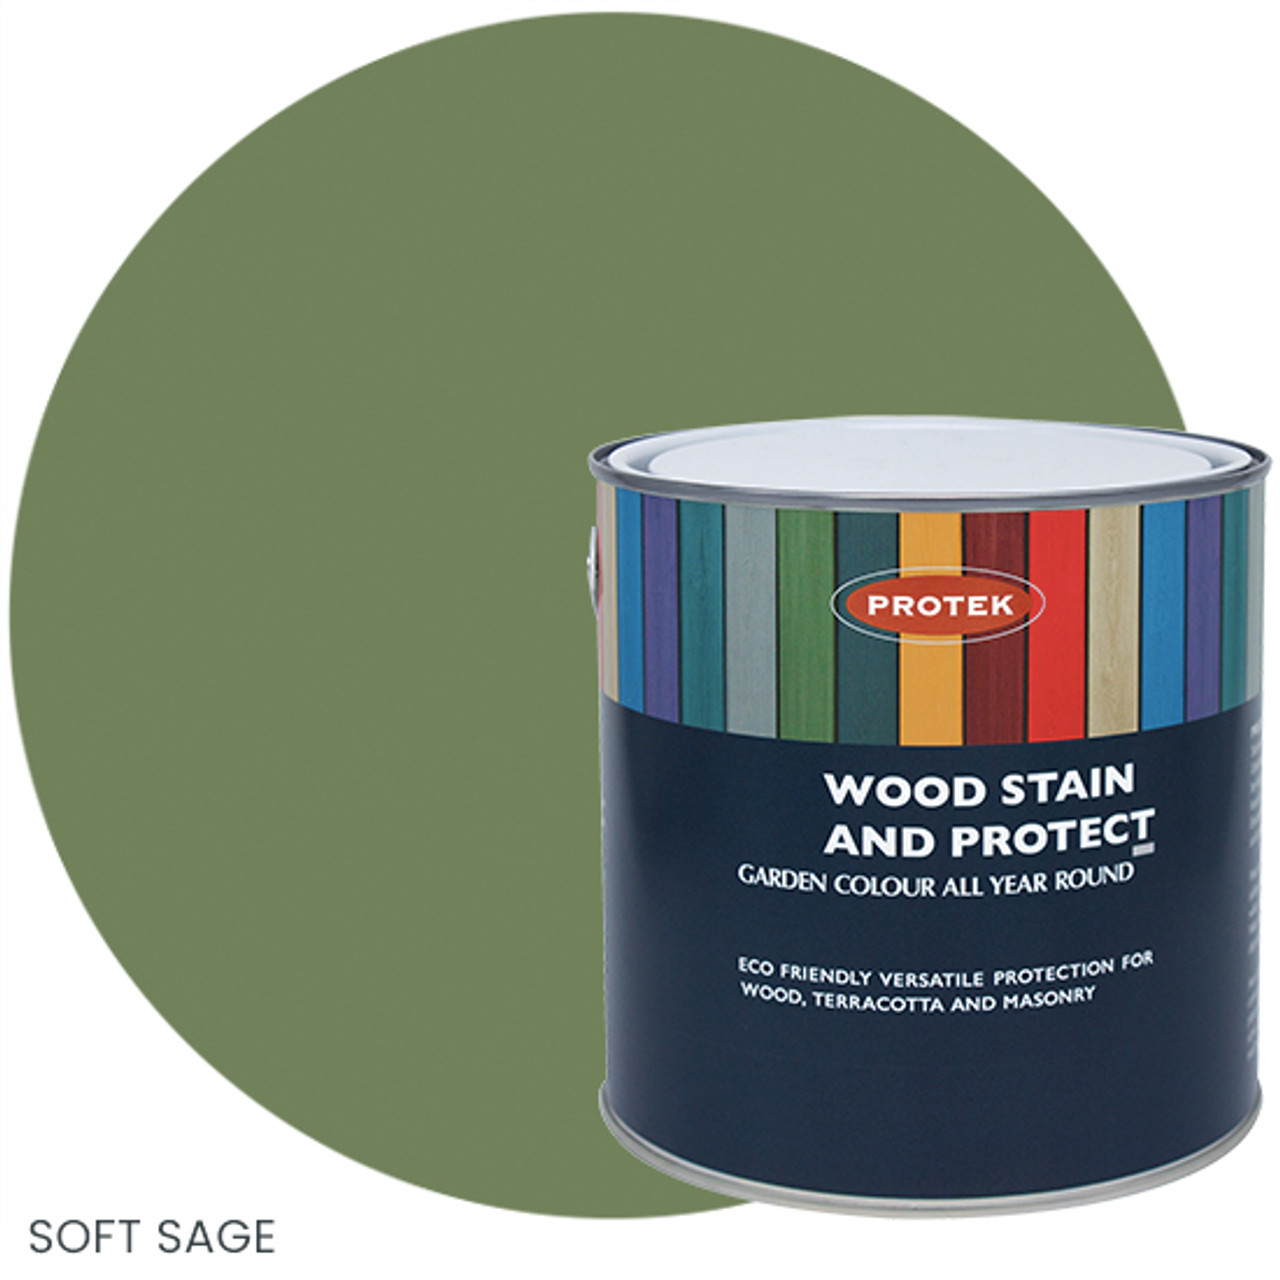 Light Green Wood Stain - Protek Wood Stain